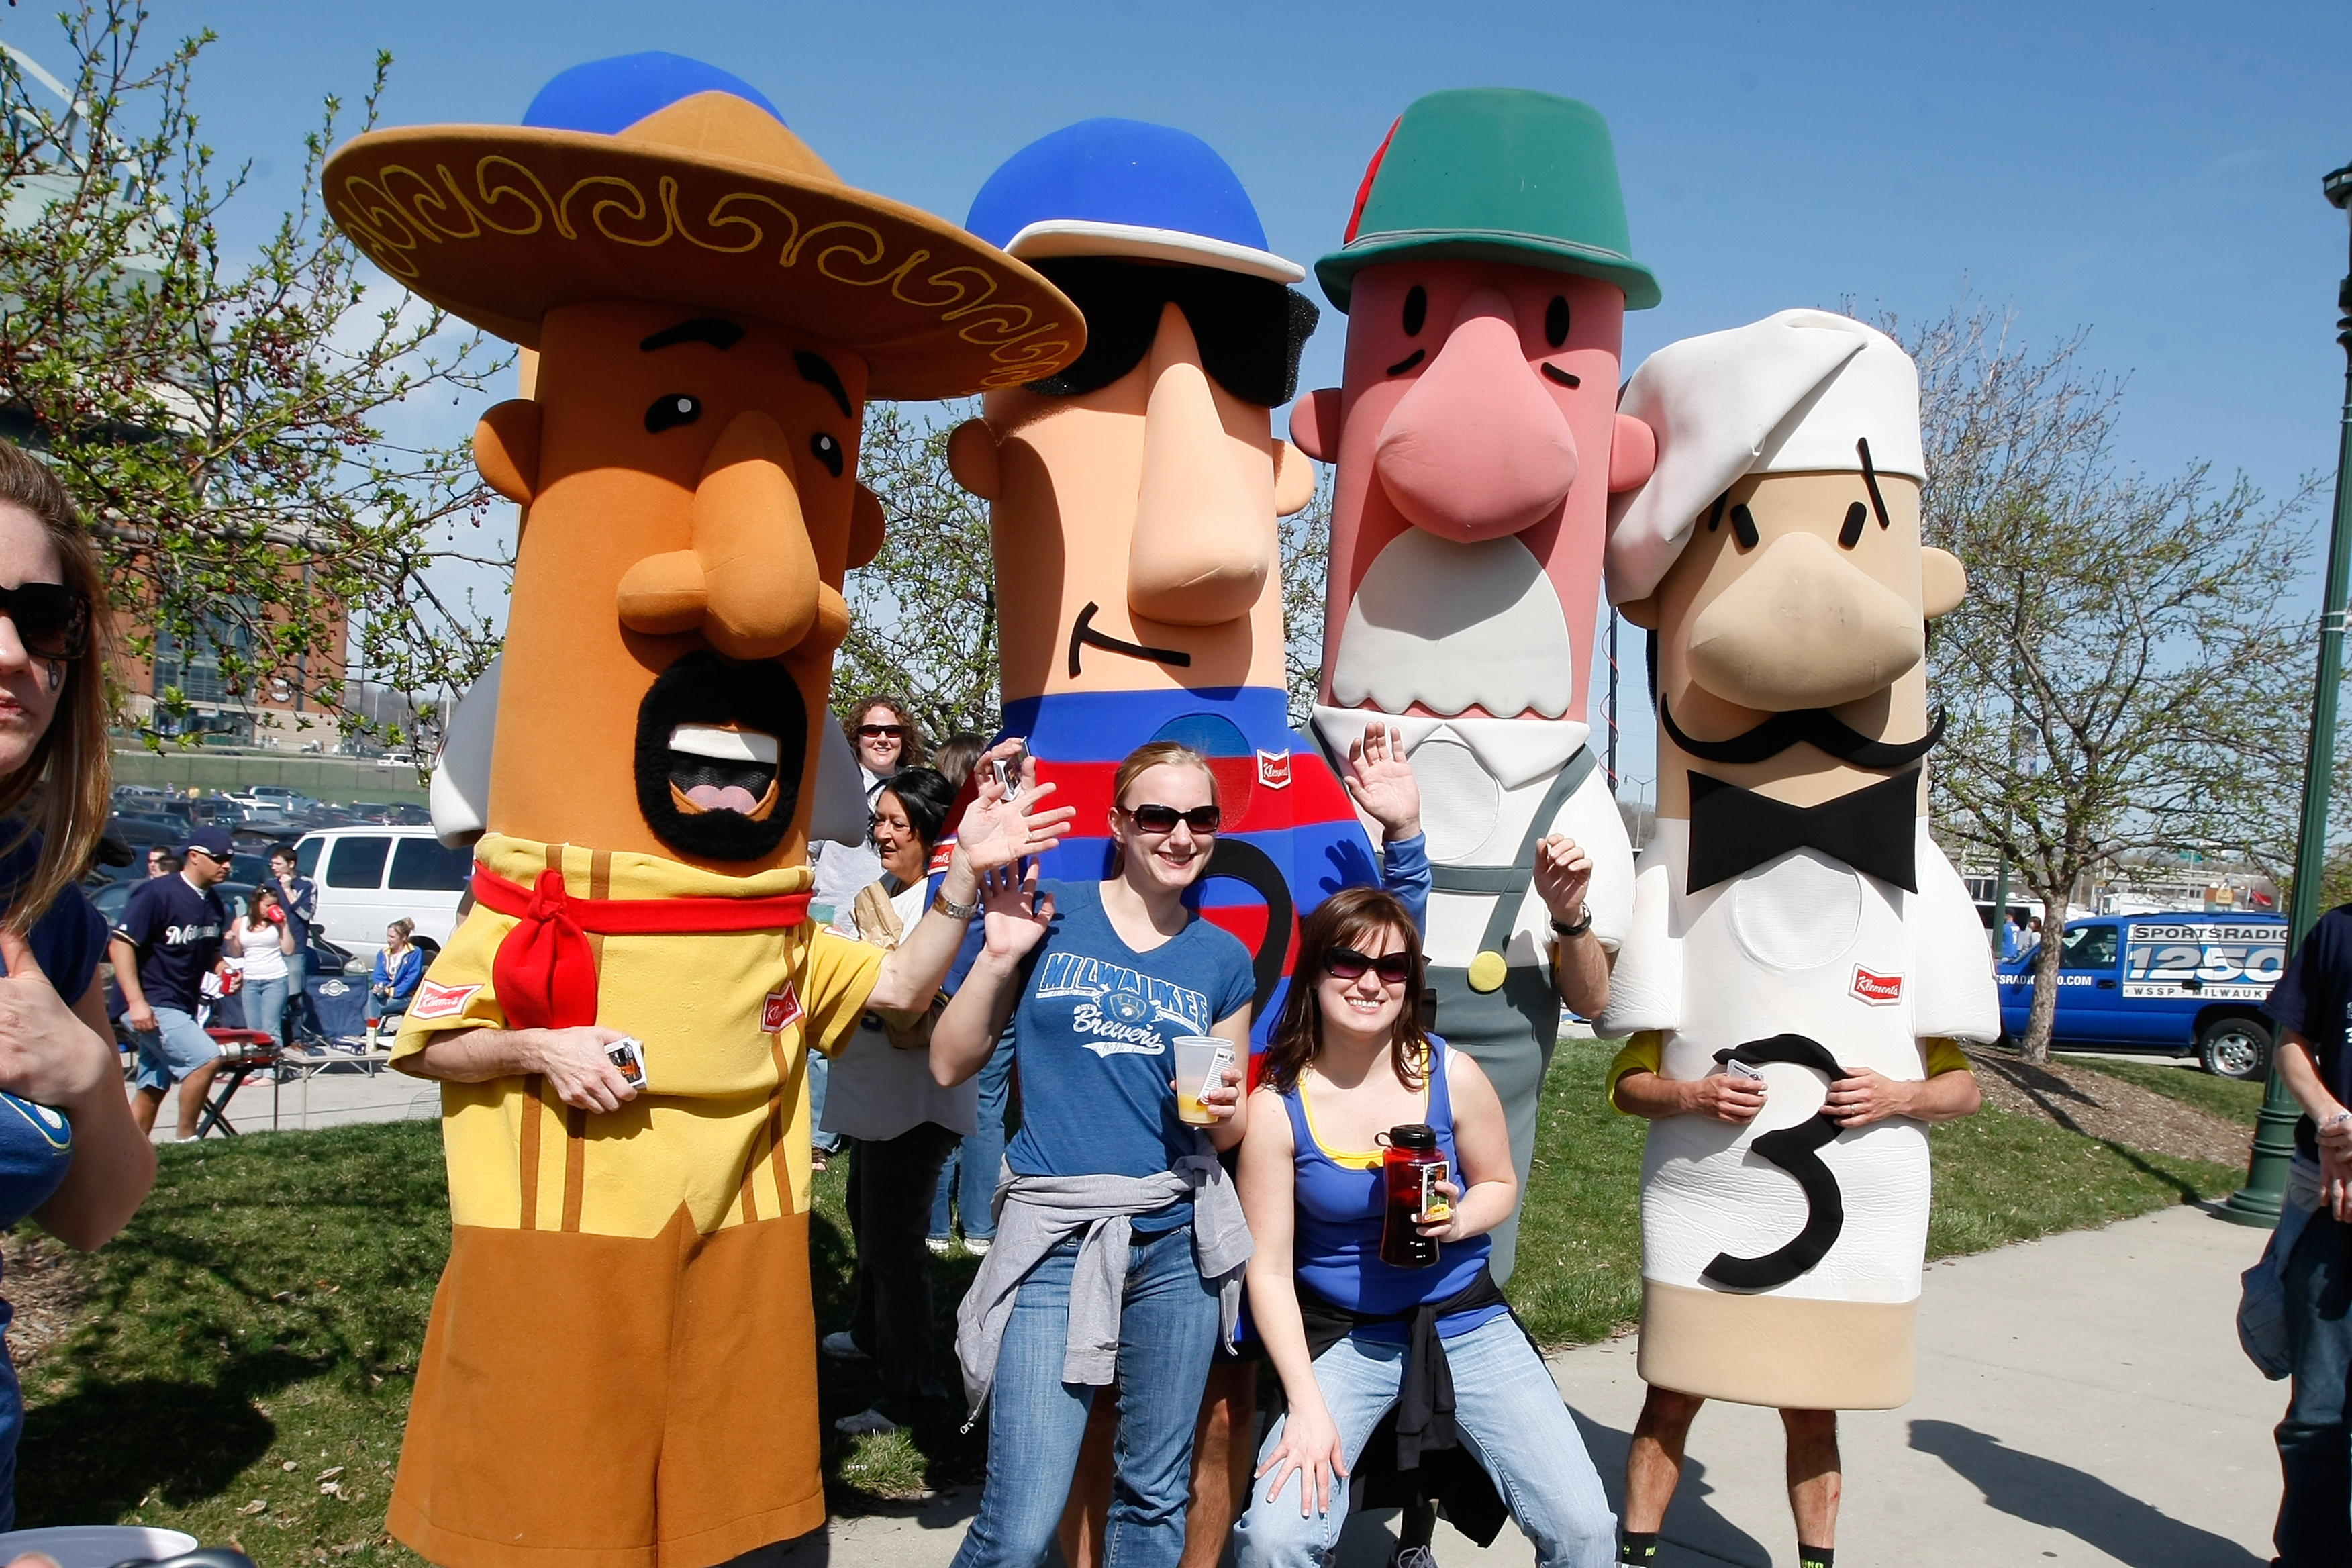 MILWAUKEE, WI - APRIL 05: Brewers fans pose with the racing sausages in the parking lots outside of Miller Park prior to the game between the Colorado Rockies and the Milwaukee Brewers at Miller Park on April 5, 2010 in Milwaukee, Wisconsin. (Photo by Sco